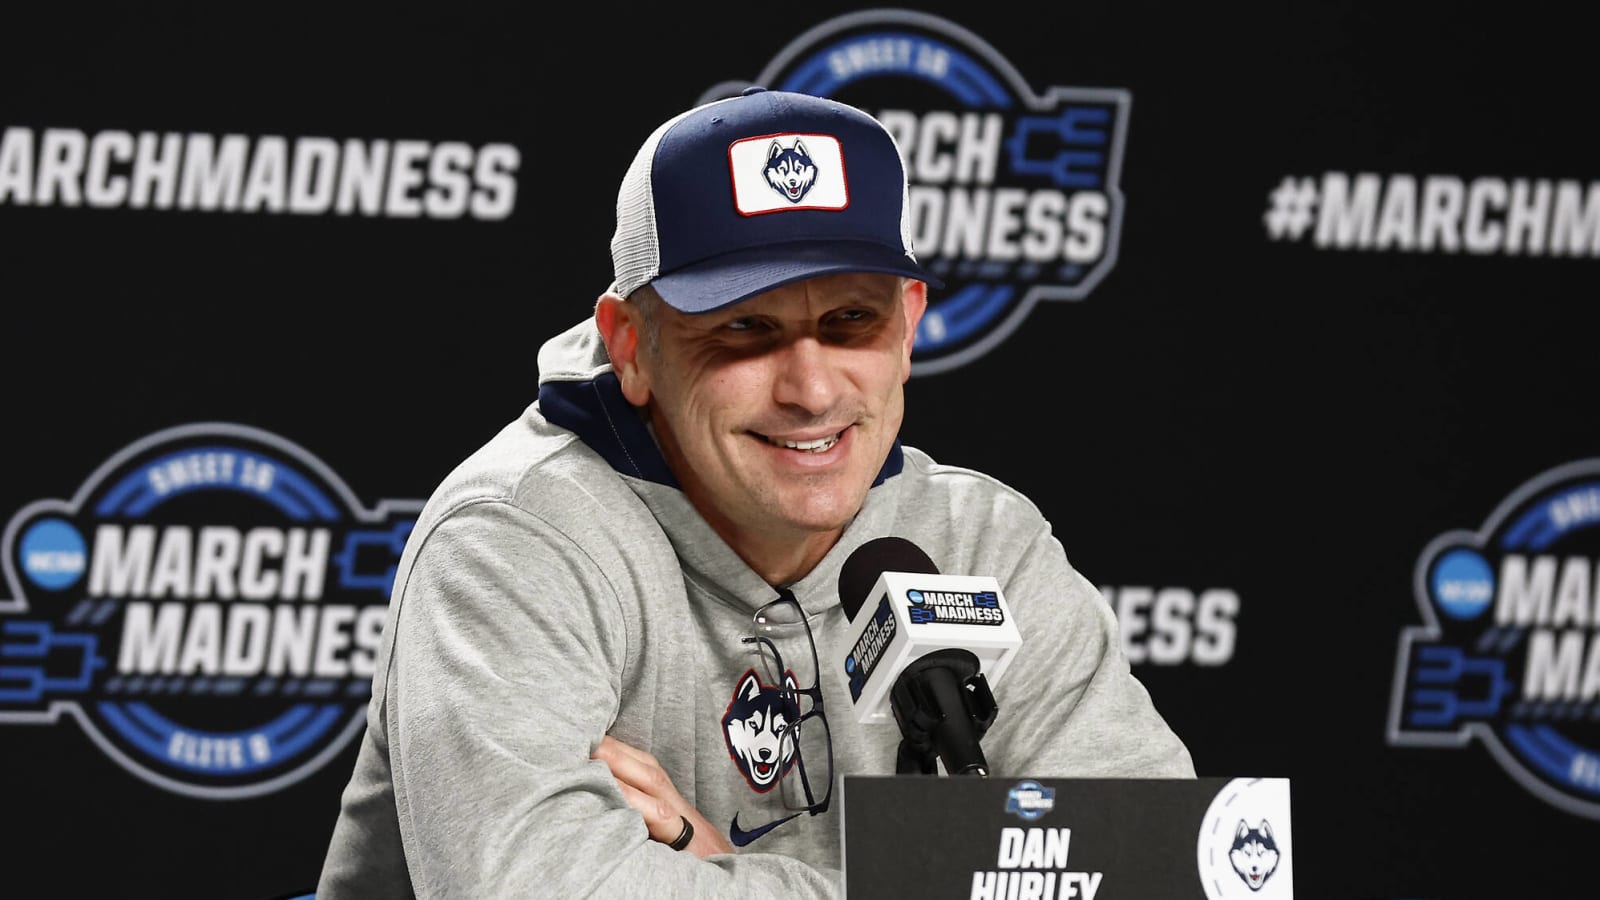 UConn Huskies: Dan Hurley Talks About Terrifying ‘Alternative’ Amid Pure March Madness Dominance